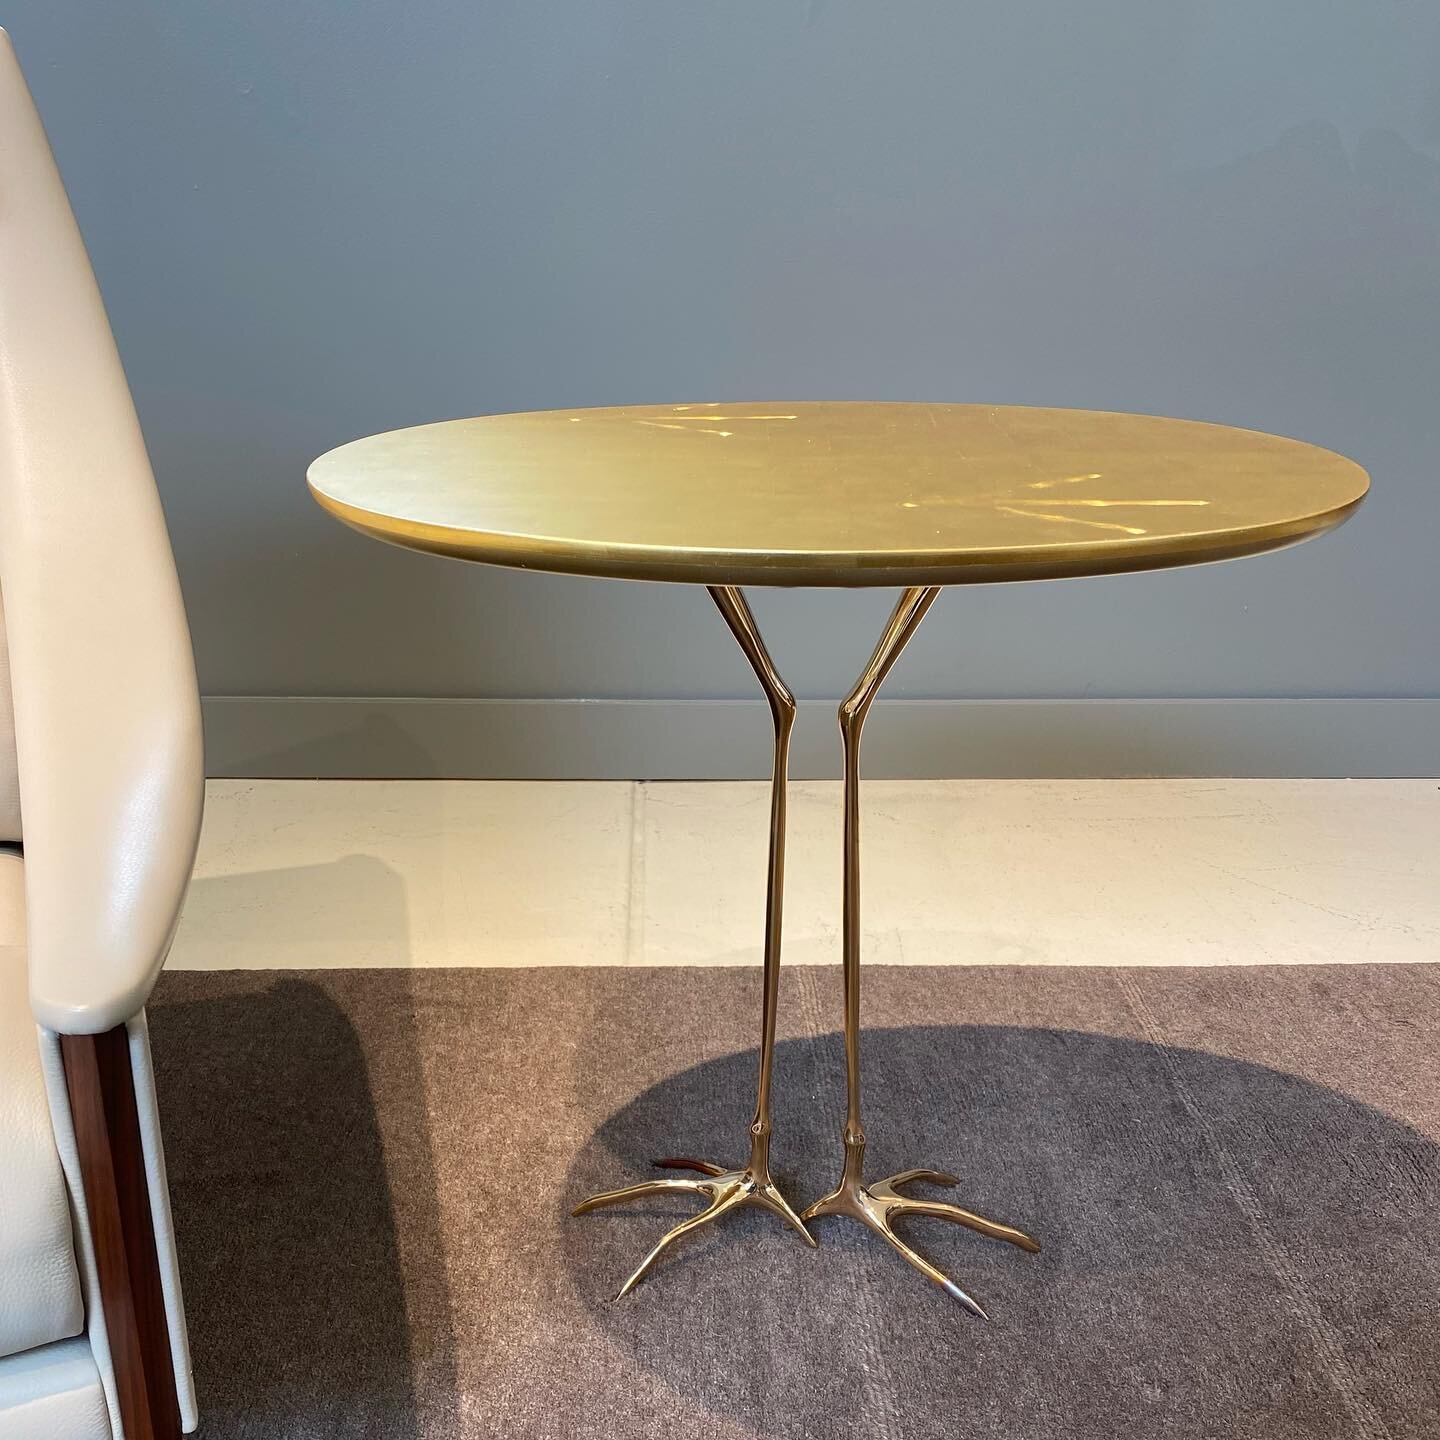 The TRACCIA side table, created in 1939 by Swiss Surrealist Meret Oppenheim, has slender, polished cast-bronze legs and feet (a tribute to classic &ldquo;claw-foot&rdquo; furniture of centuries past) and foot prints carved into an oval wooden top whi